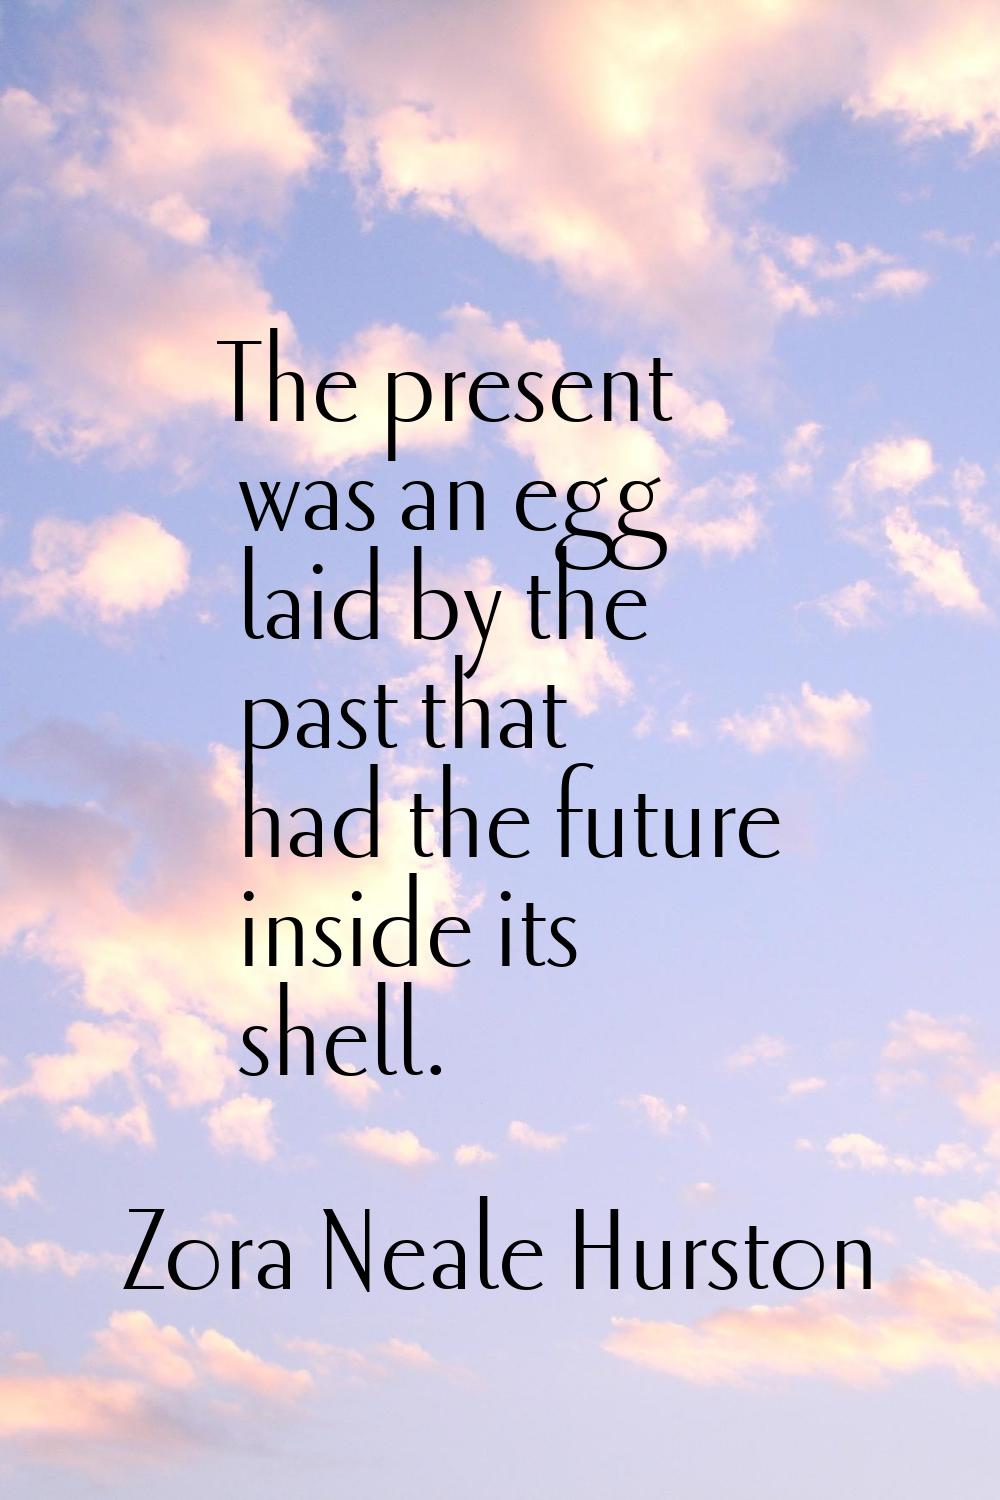 The present was an egg laid by the past that had the future inside its shell.